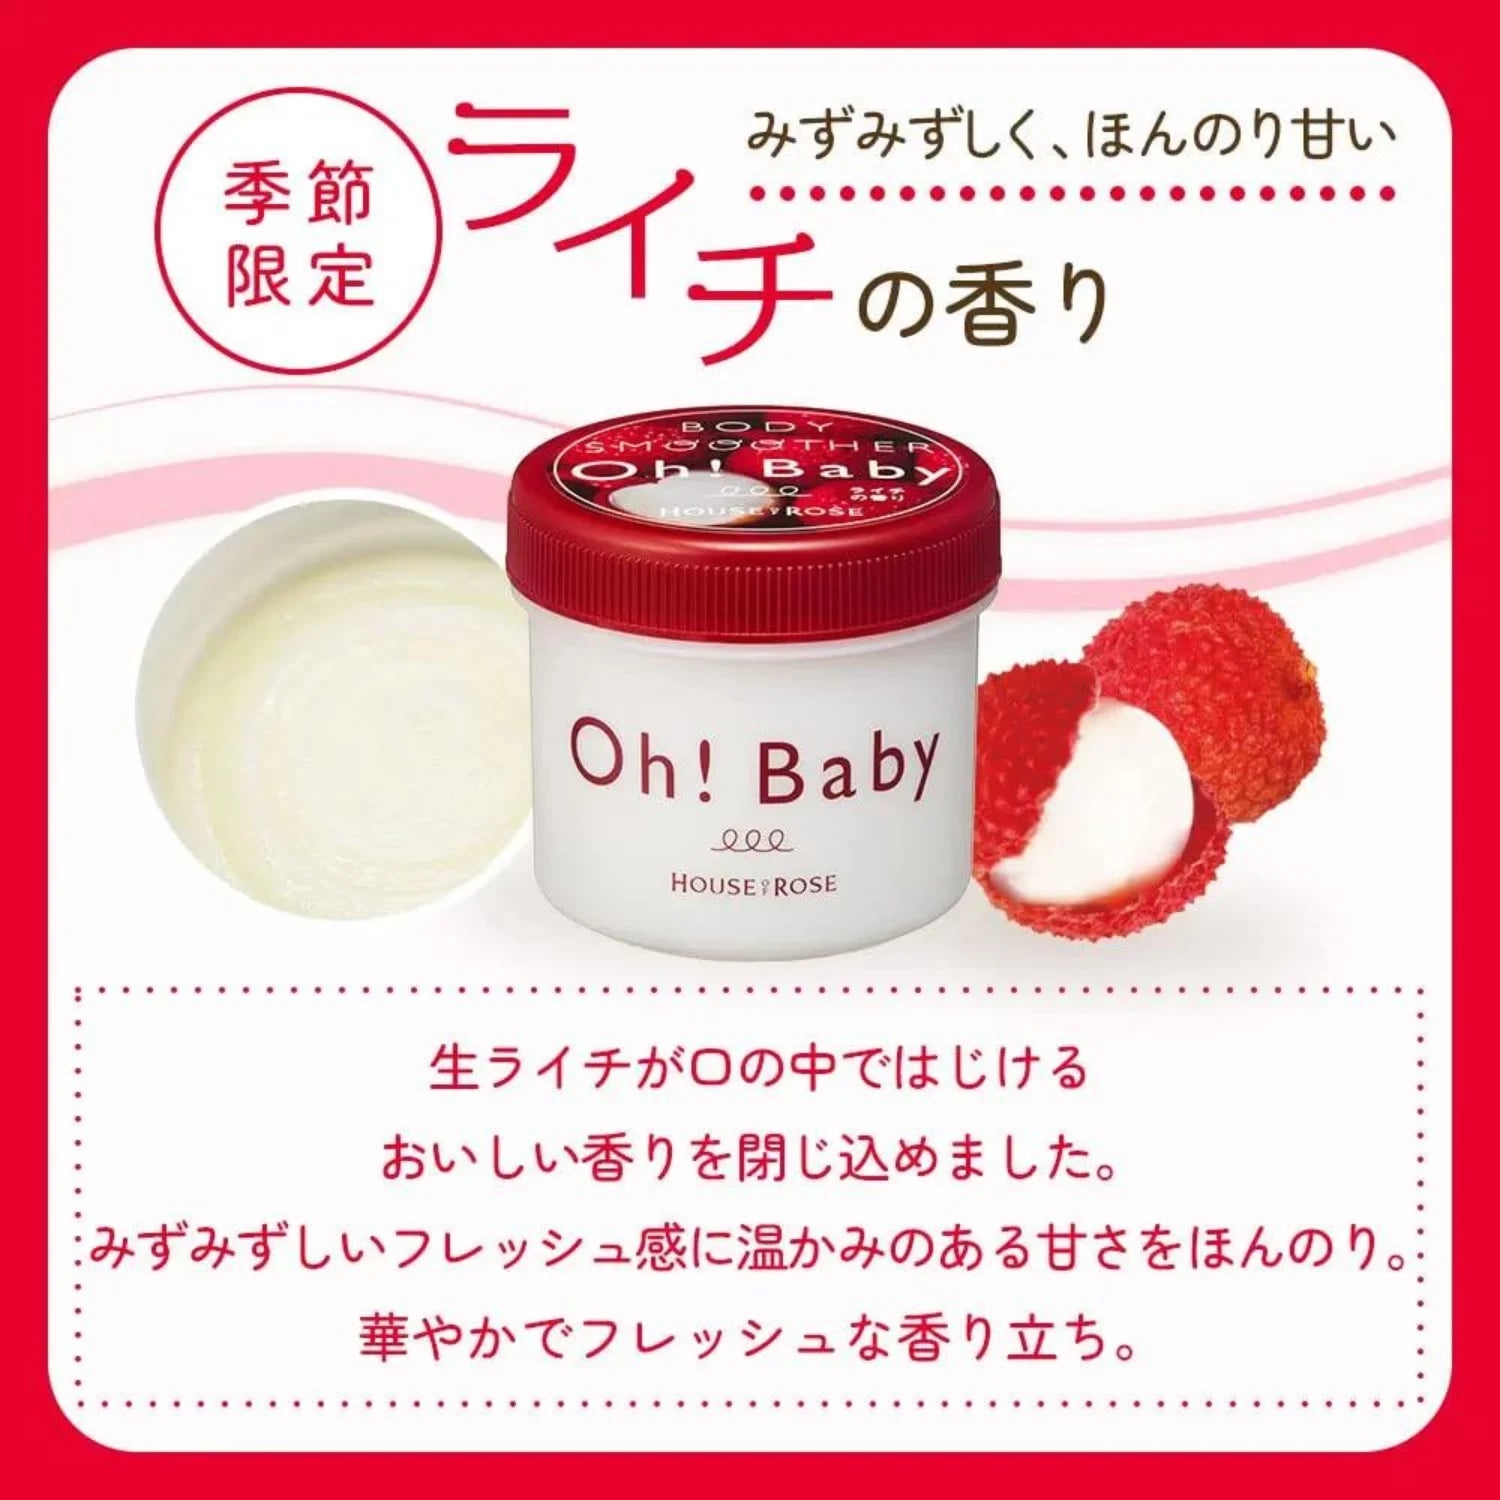 House Of Rose Oh! Baby Body Scrub Smoother Cream Pure Lychee 200g - Buy Me Japan